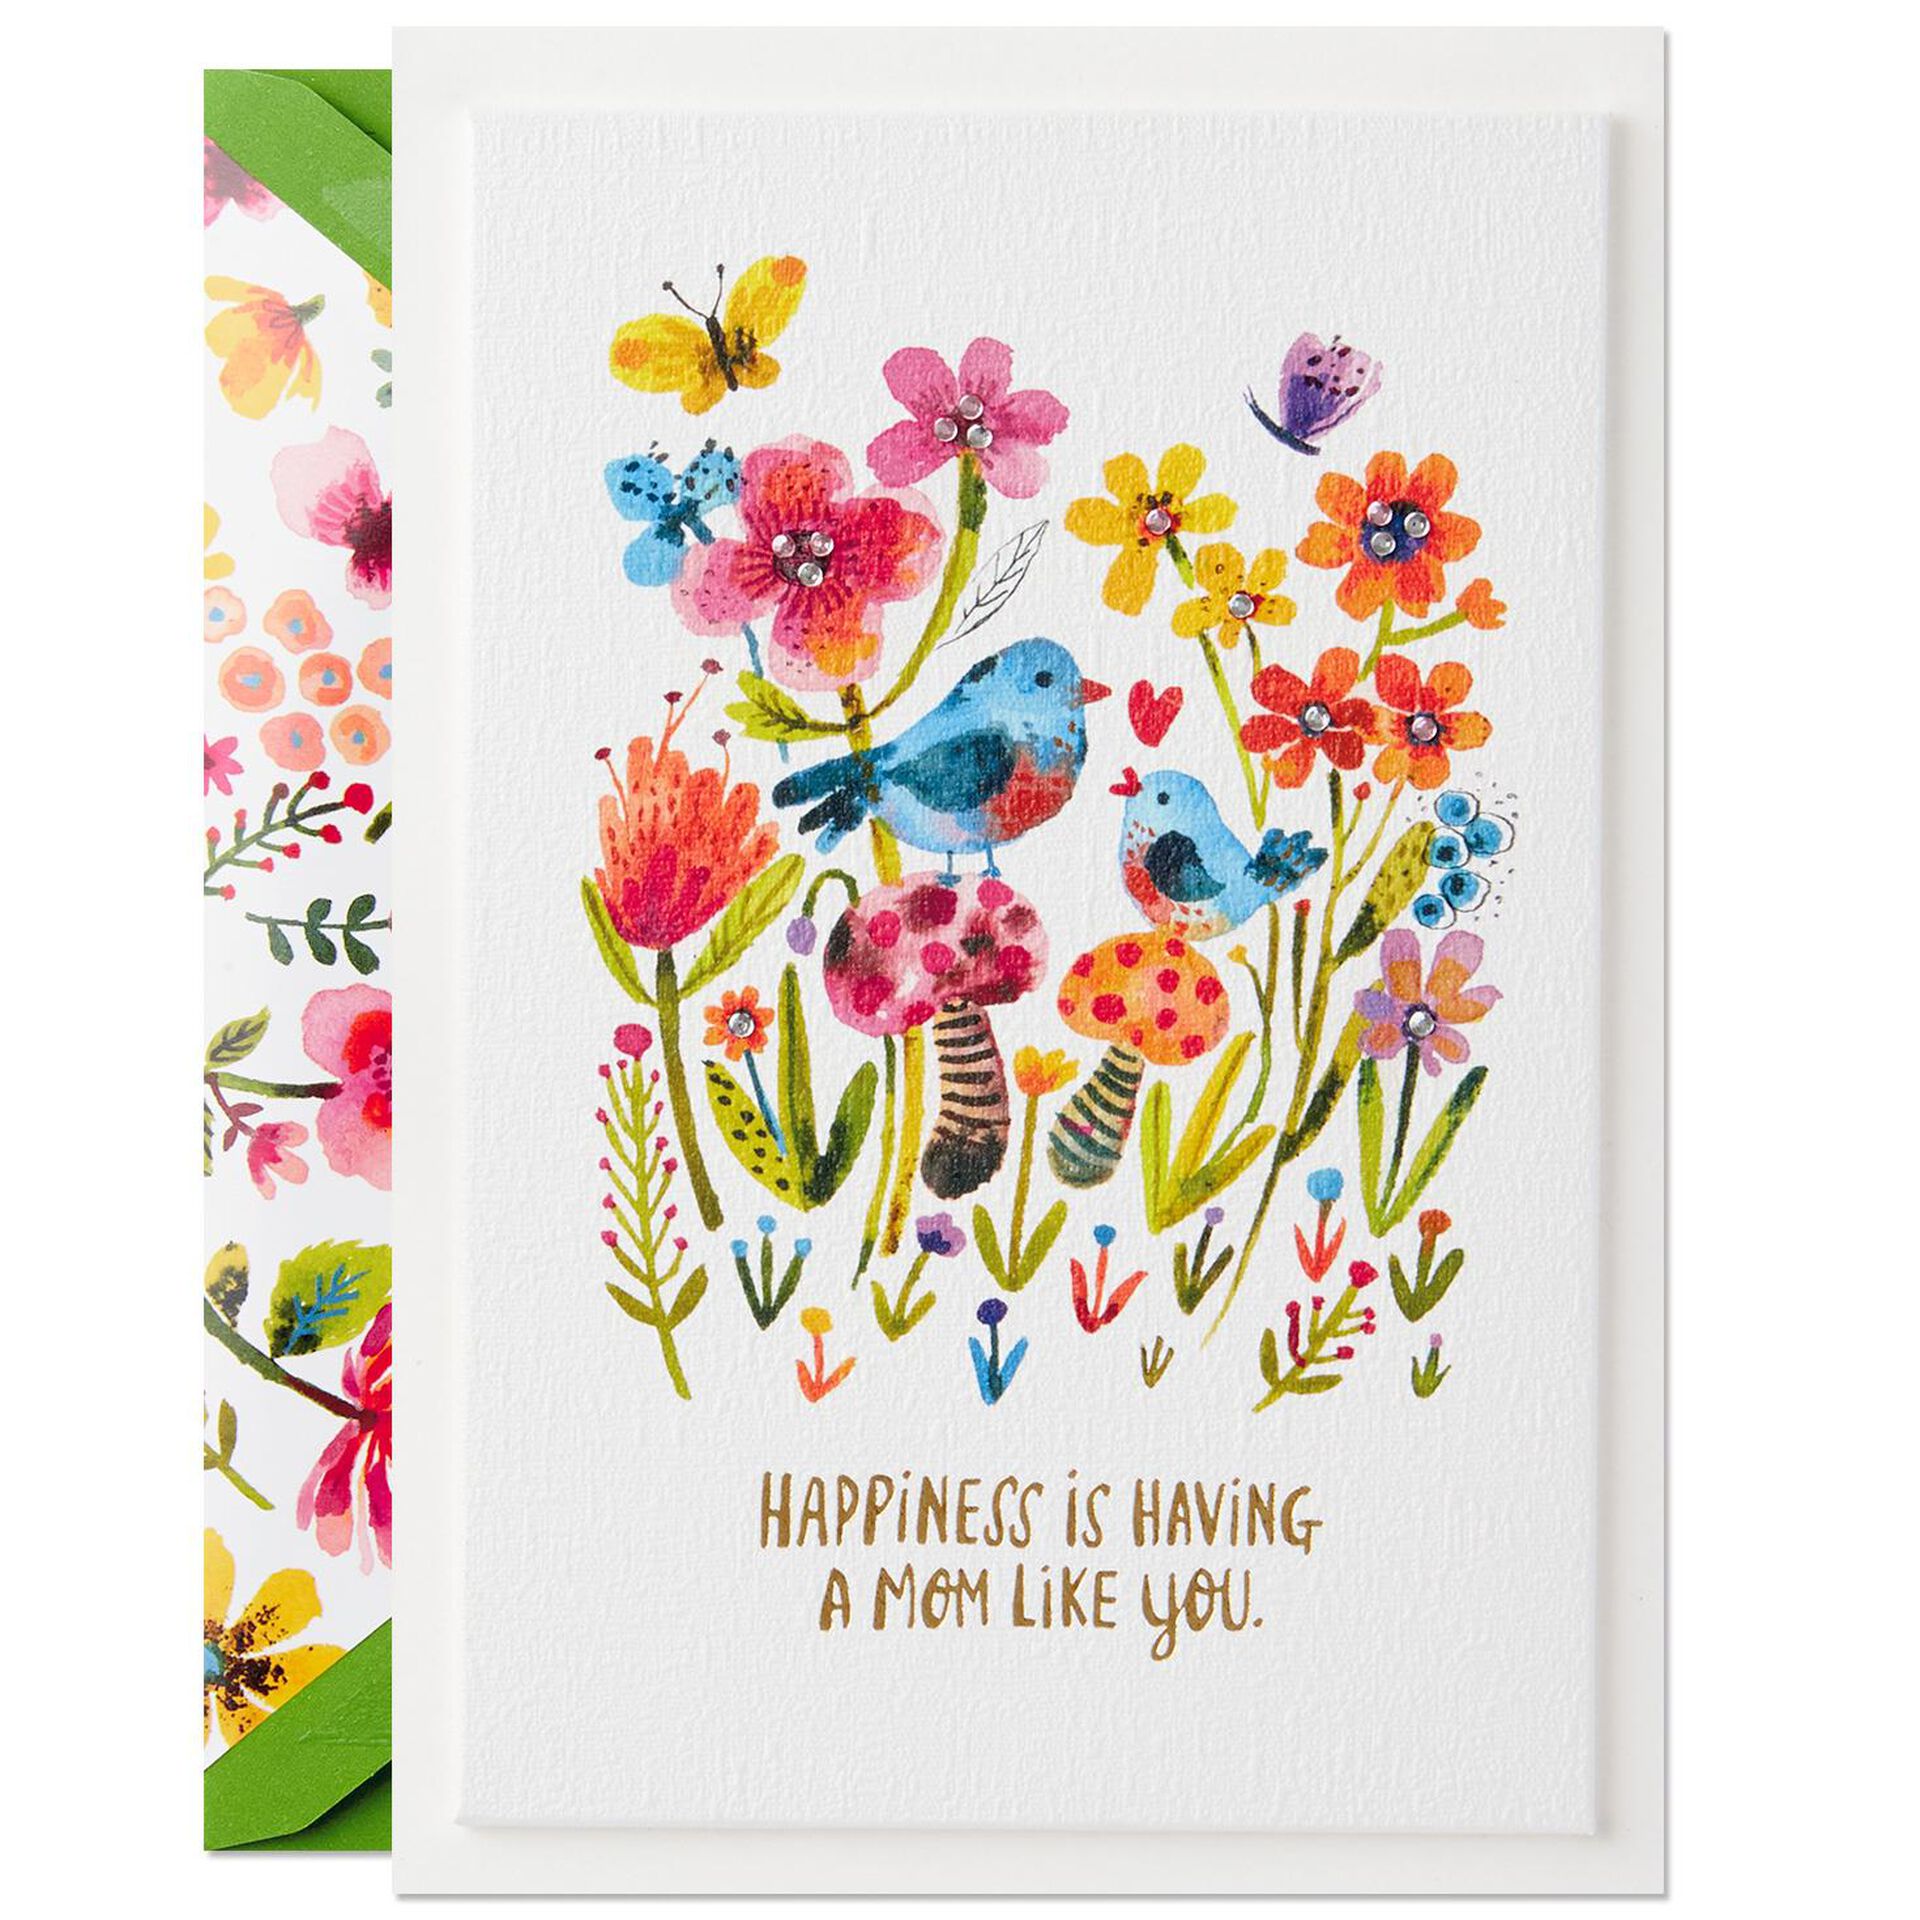 Happiness is You Mother's Day Card - Greeting Cards - Hallmark